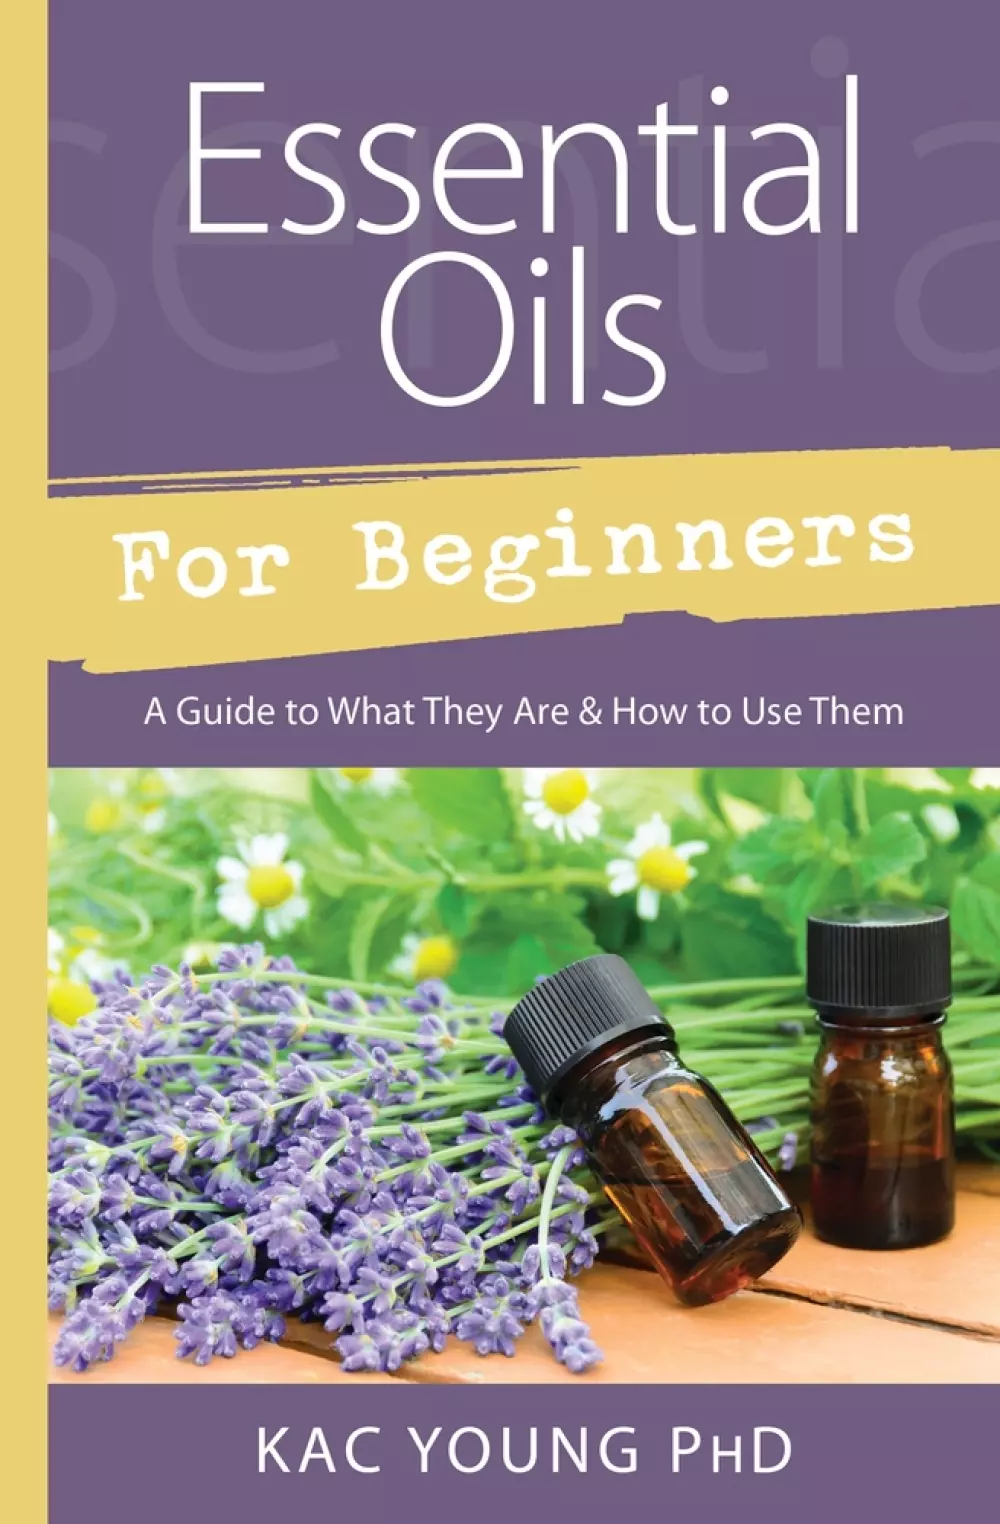 Essential Oils for beginners, Bøker, Healing, meditasjon & helse, A Guide to What They Are & How to Use Them